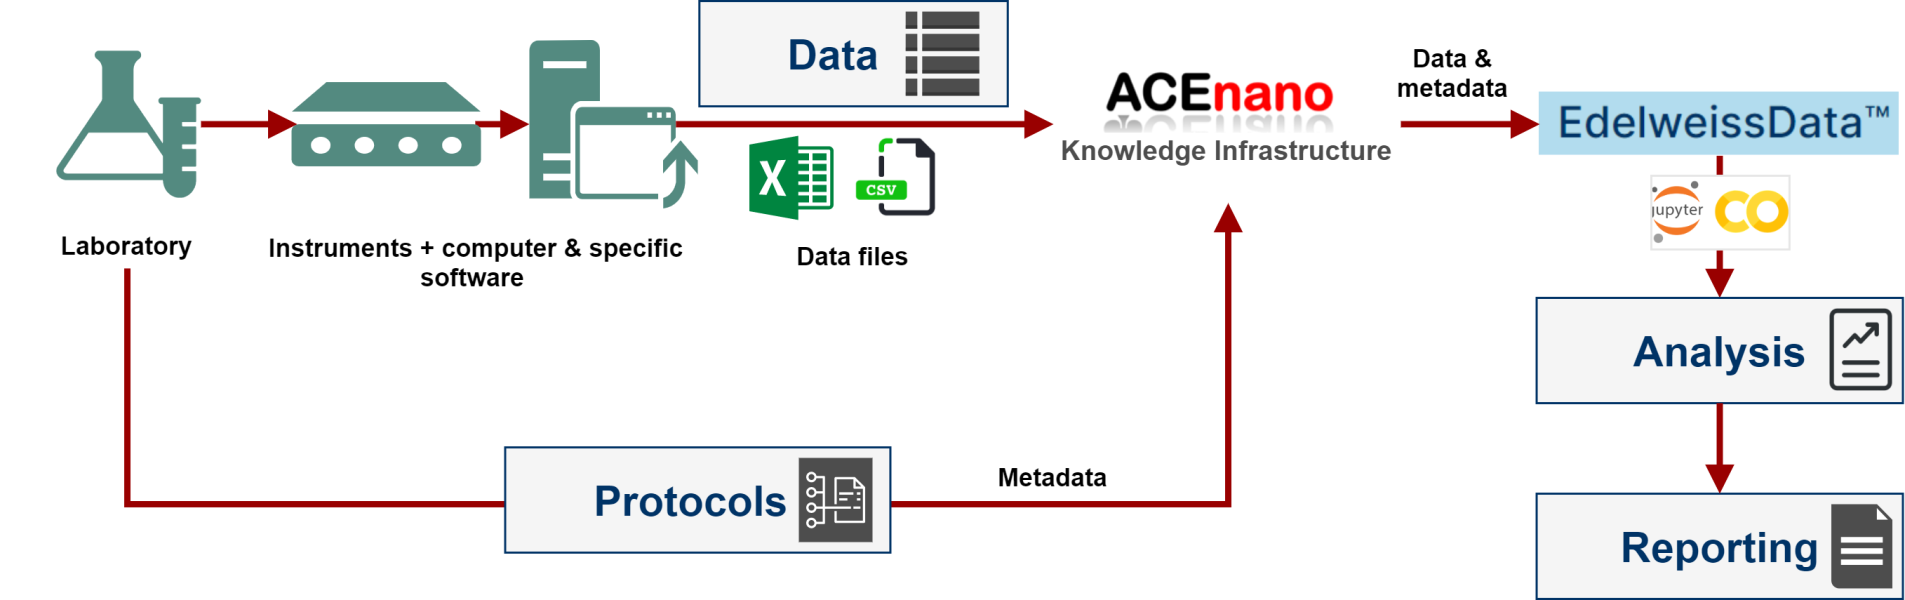 Workflow to support protocols and data handling, analysis and reporting